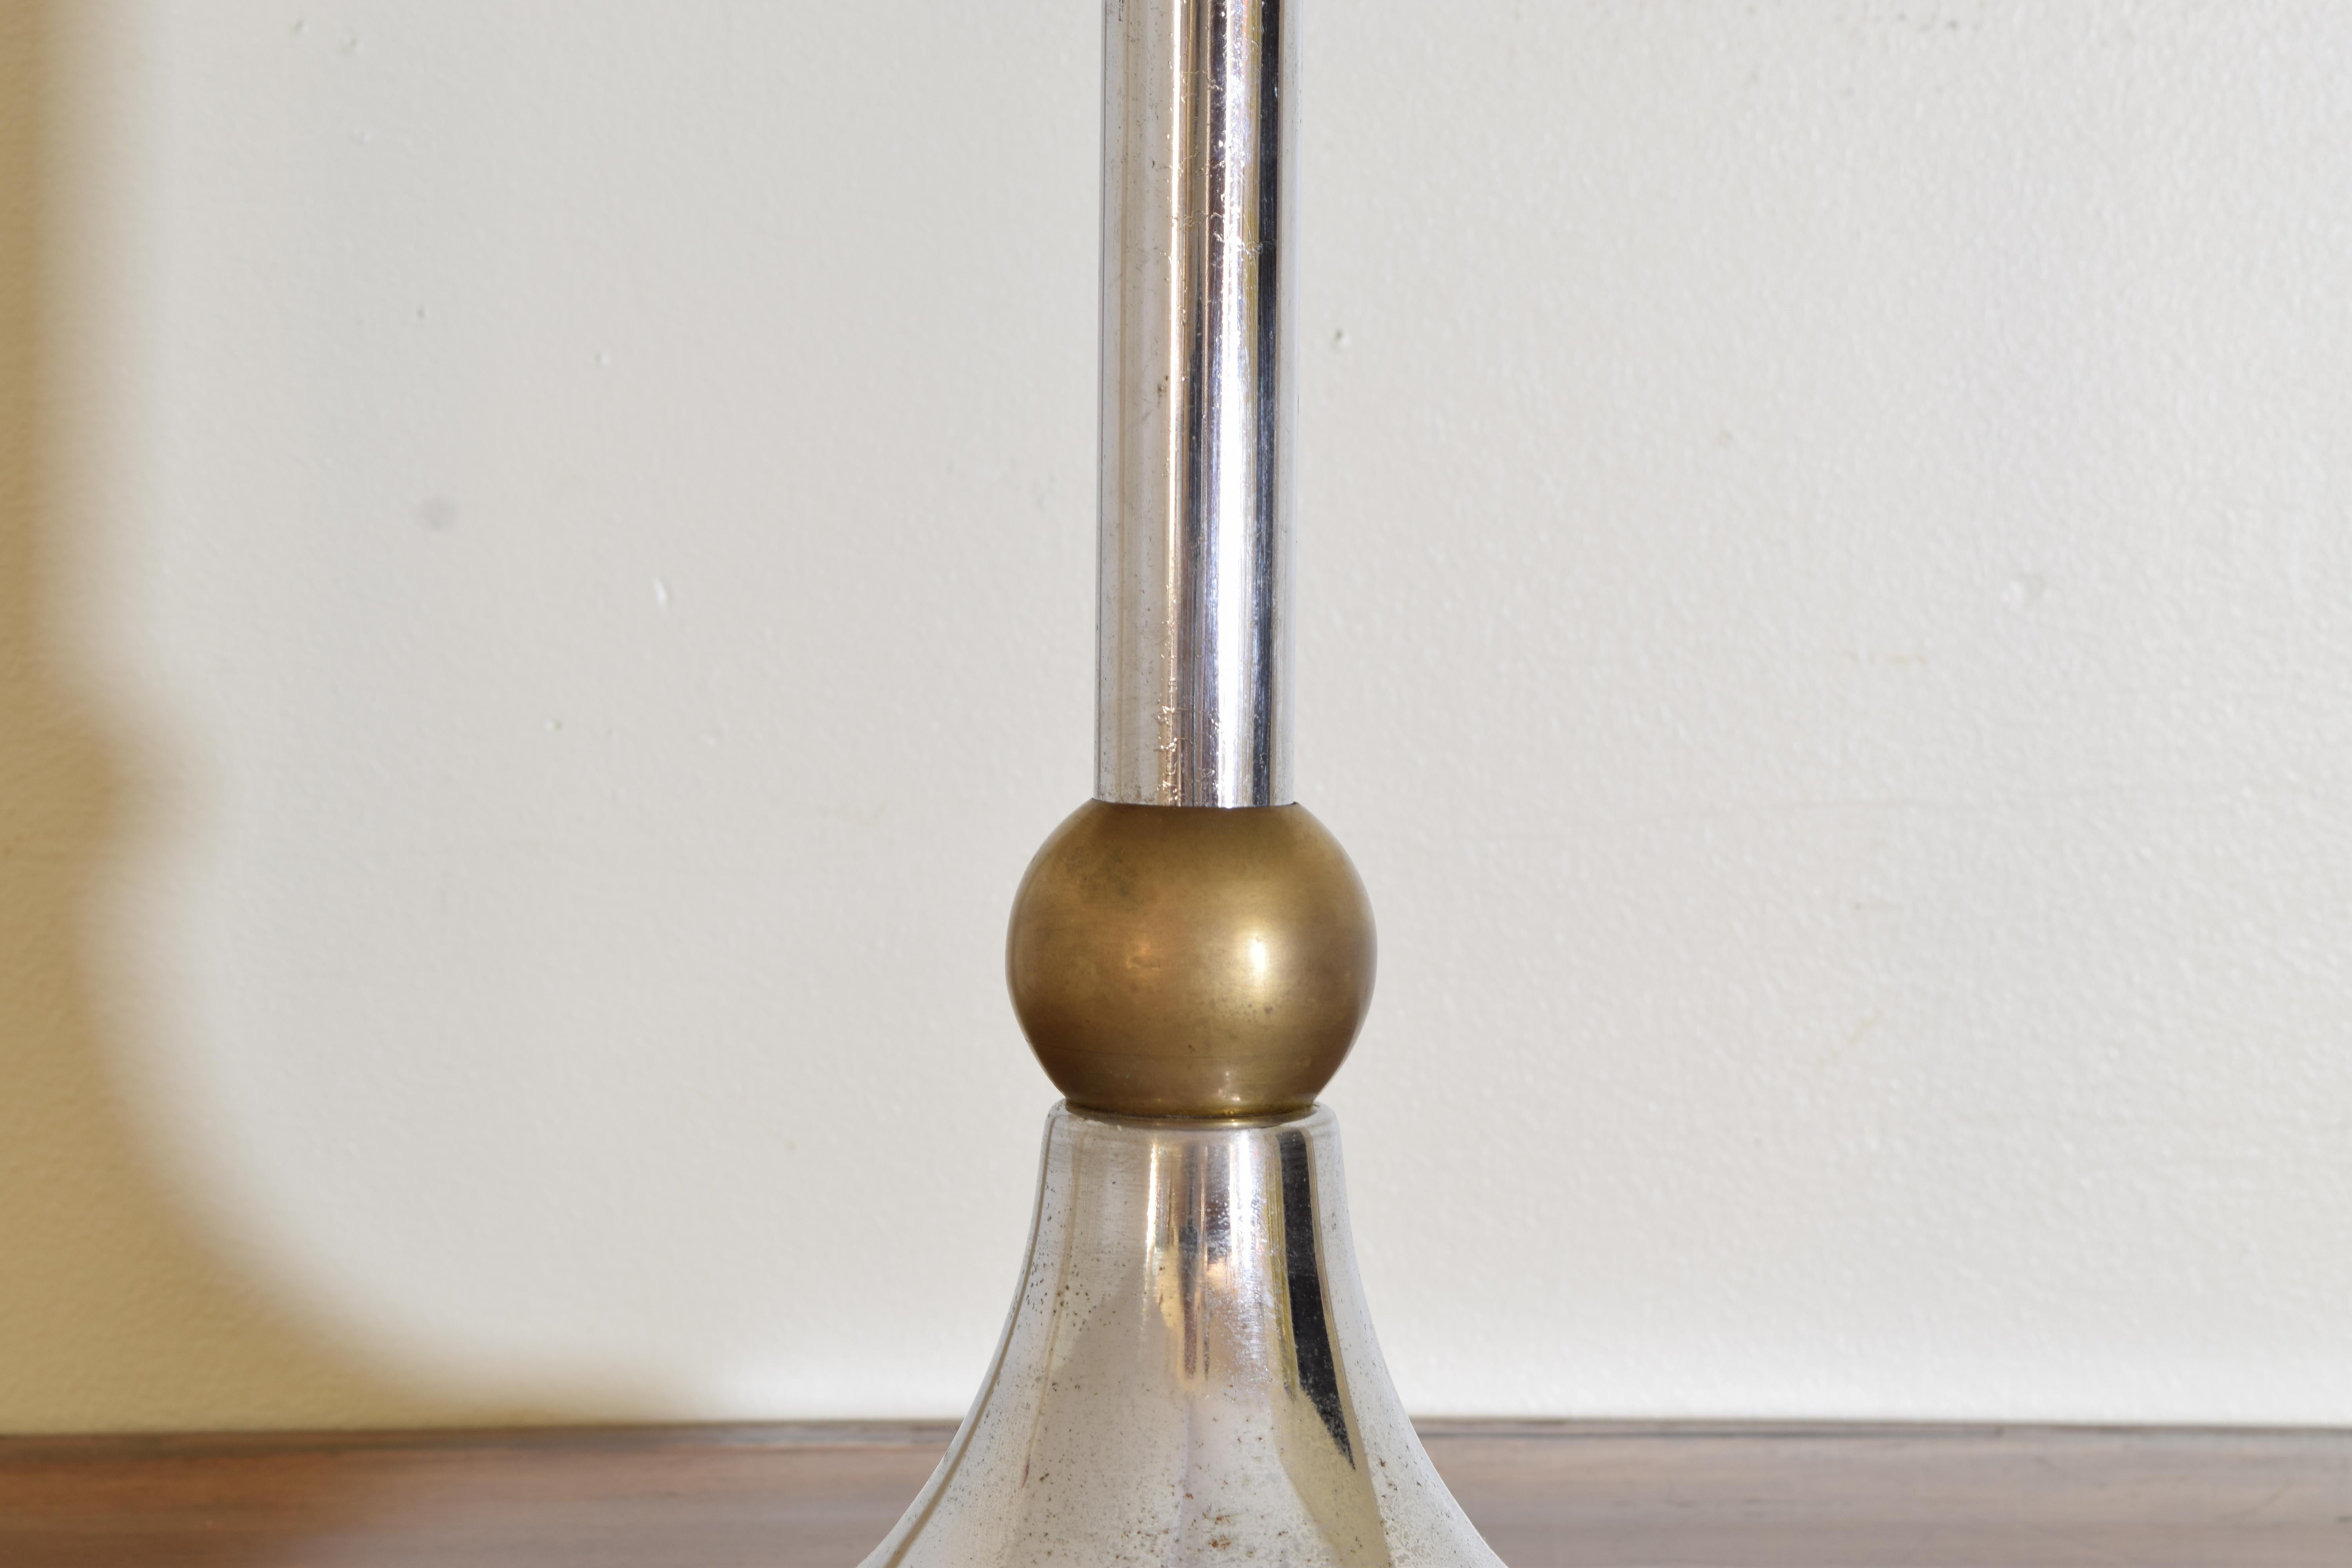 Italian Mid Century Modern Chrome and Brass Table Lamp, early 2nd half 20th cen. For Sale 1